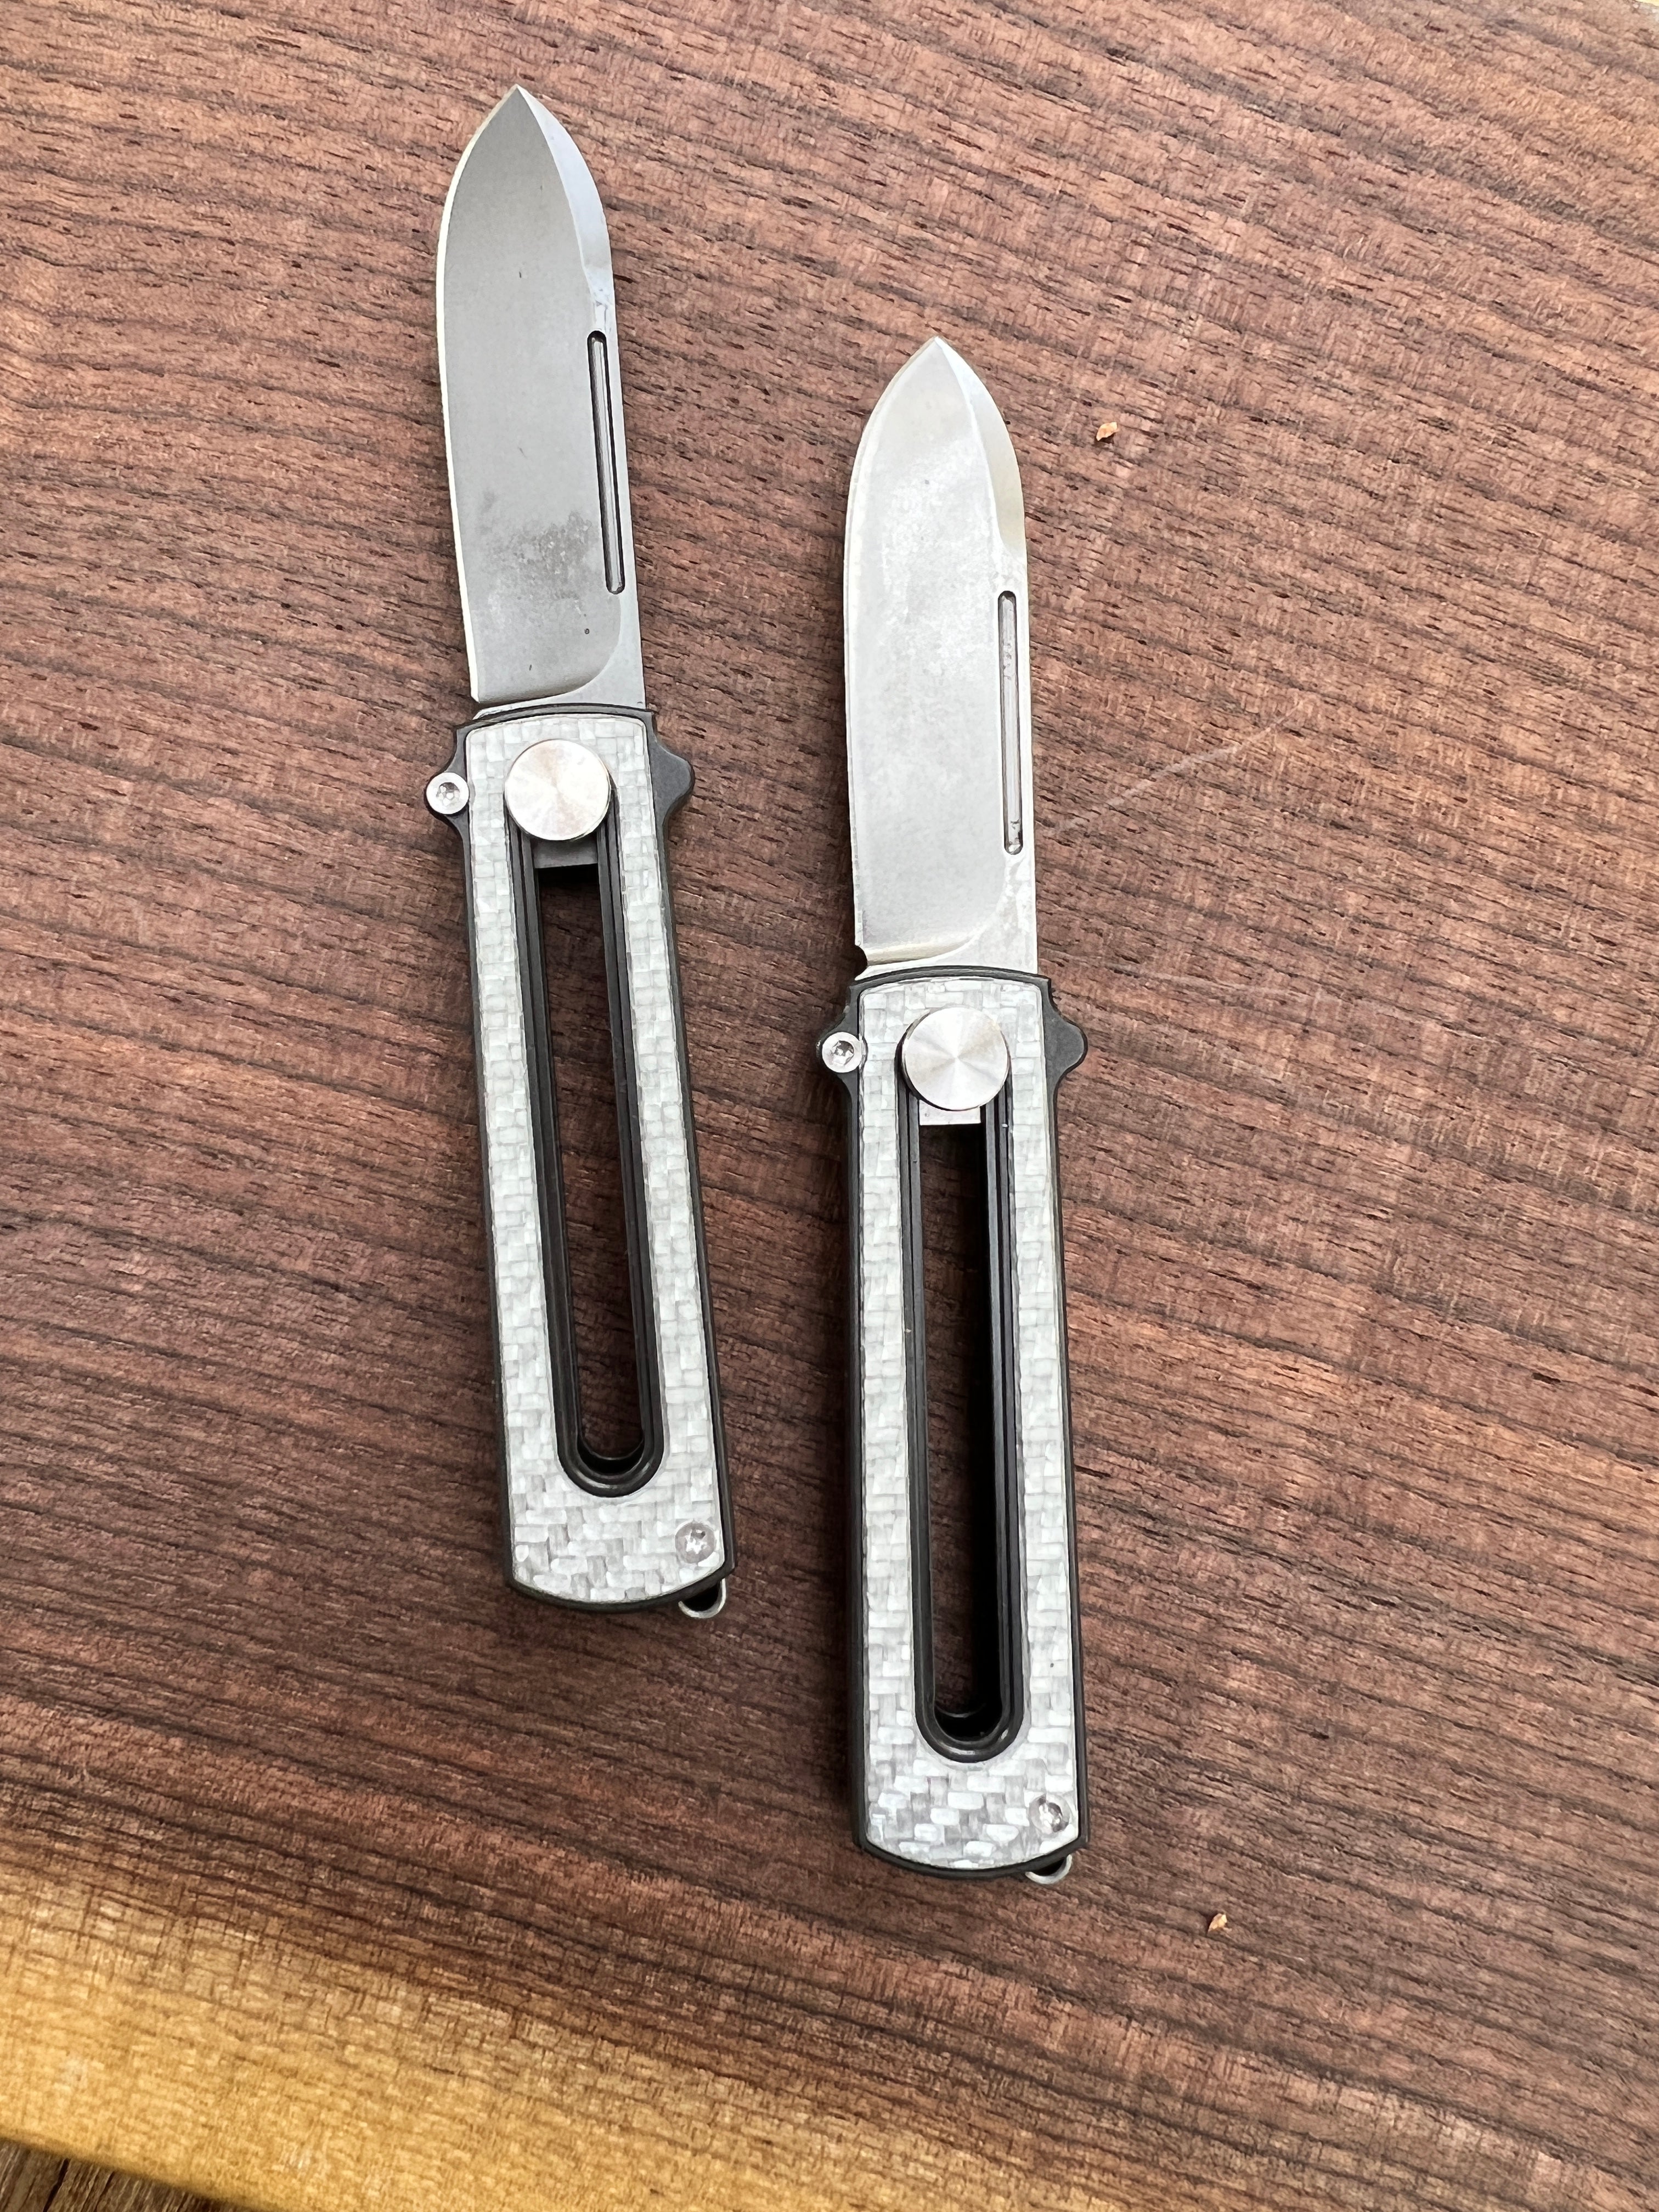 ZIRC BarloX with M390 Blade - for a short time Dealer's Cost